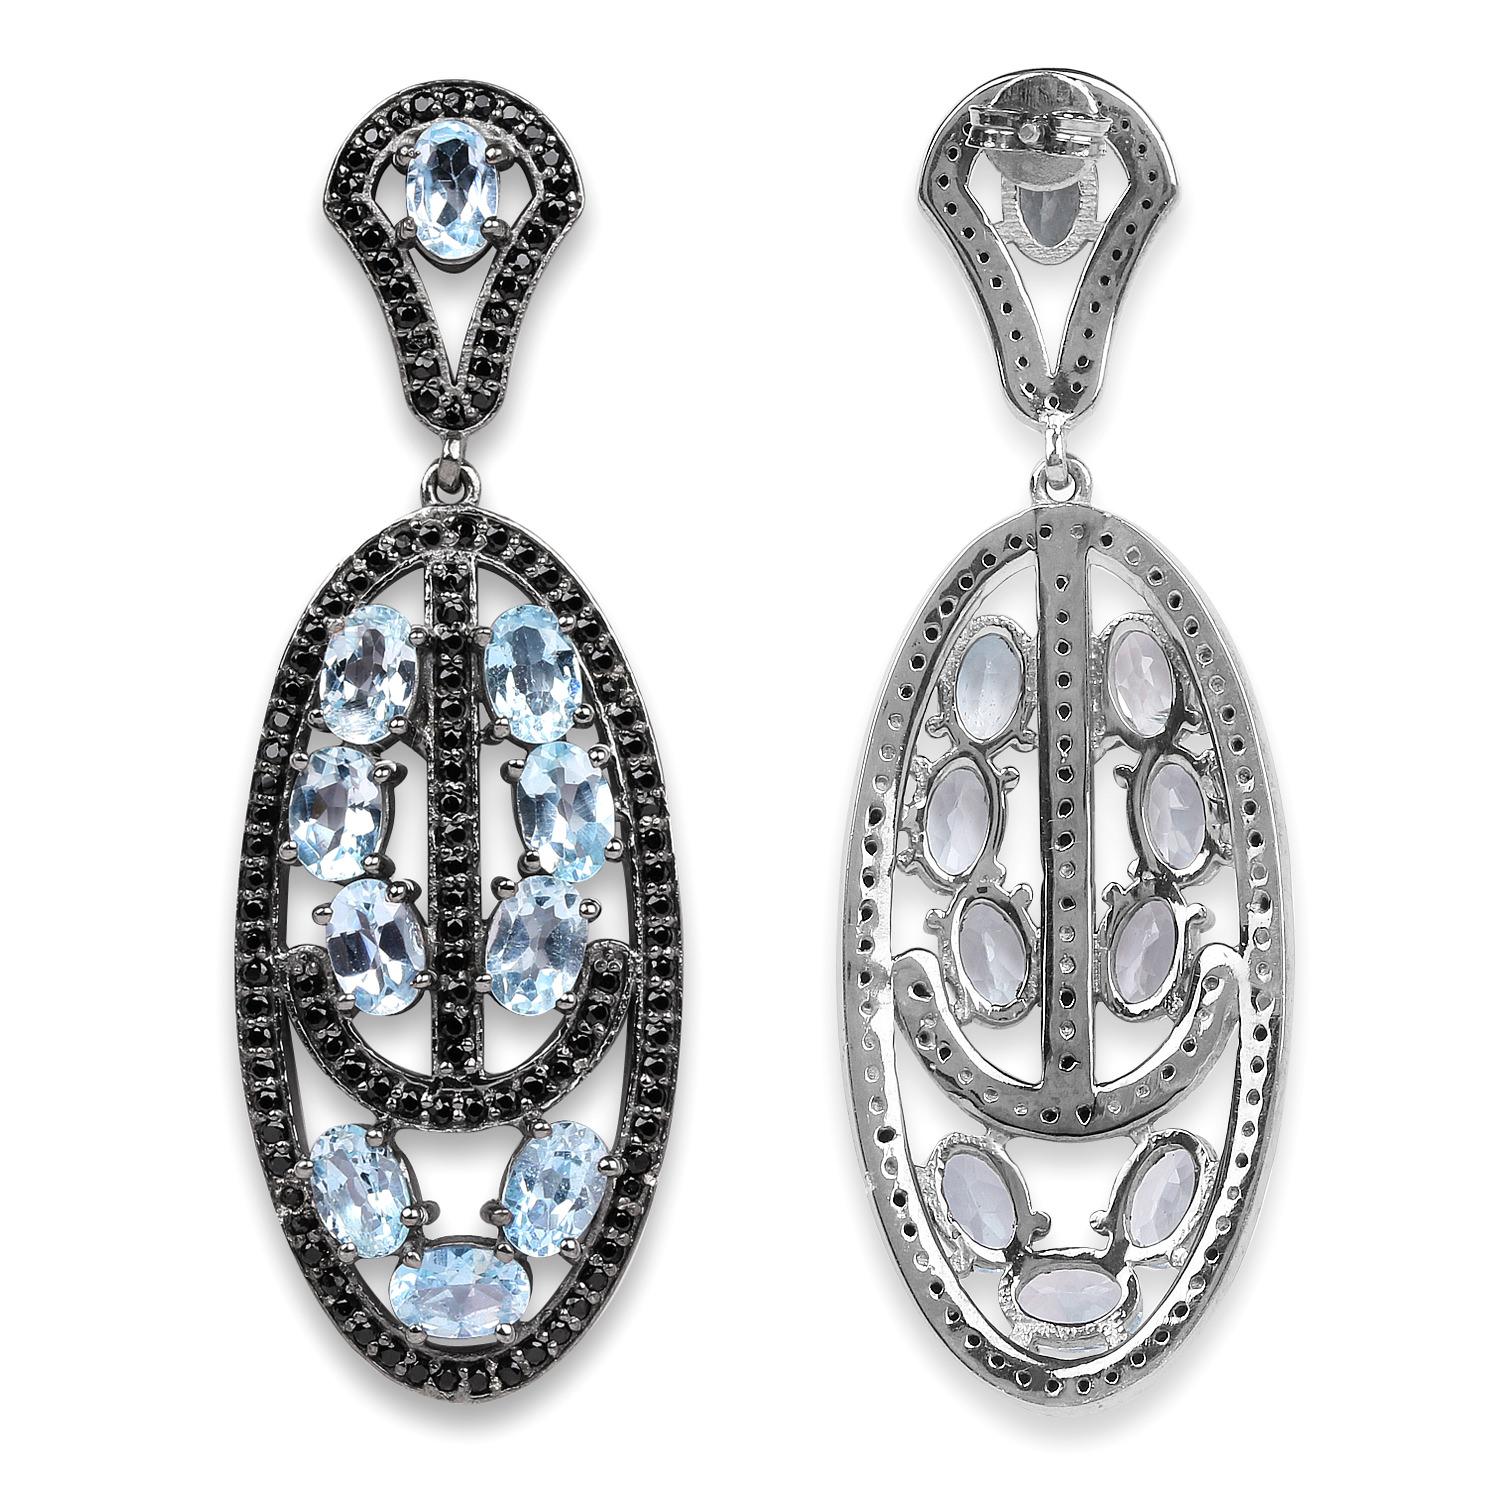 Blue Topaz Dangle Earrings With Black Spinels 13.9 Carats Rhodium Plated Silver In Excellent Condition For Sale In Laguna Niguel, CA